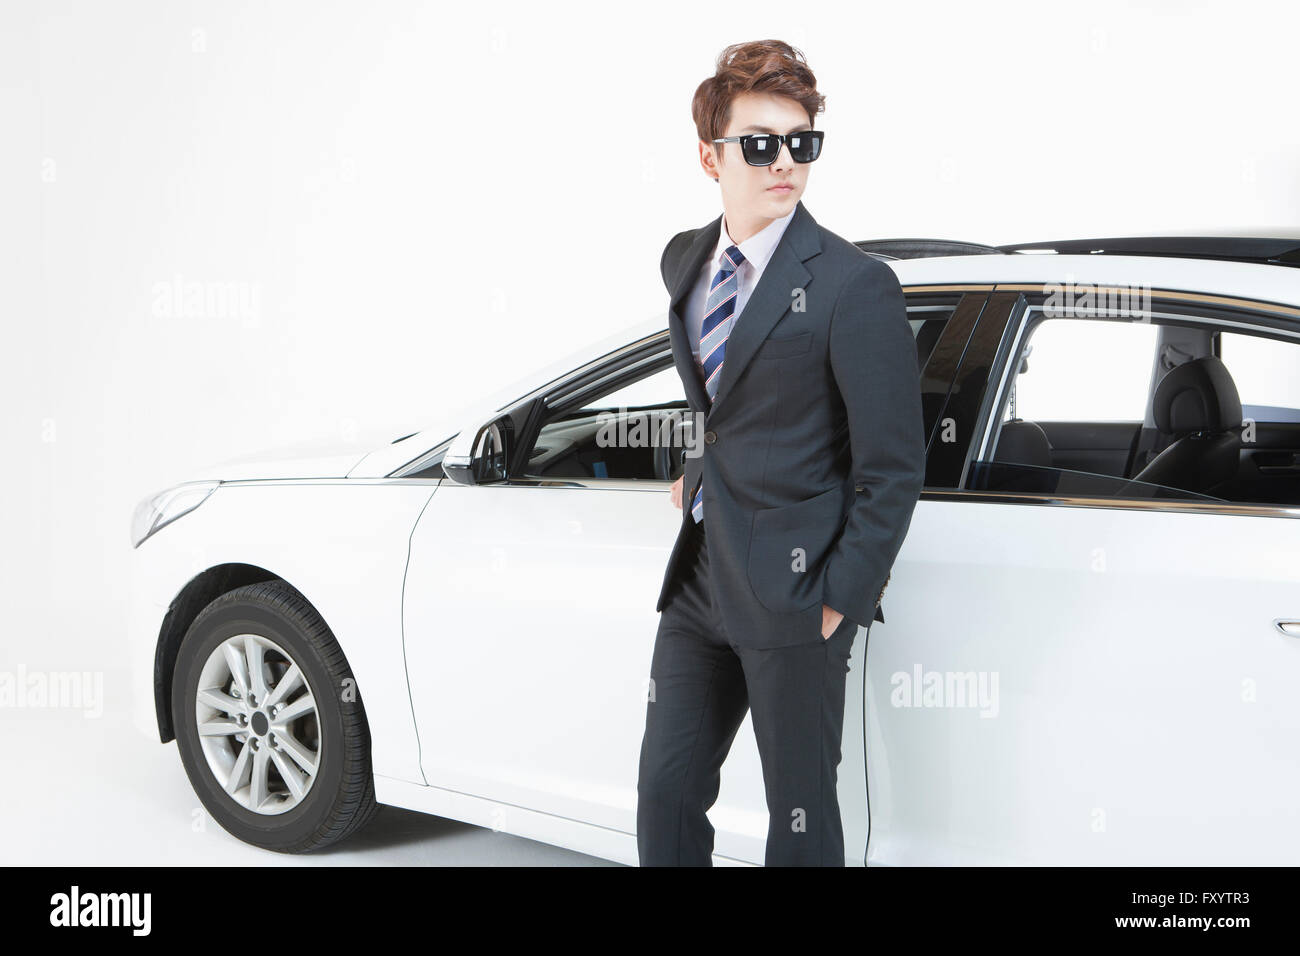 Side view of young man wearing sunglasses and suit standing with his hands in pockets in front of car Stock Photo